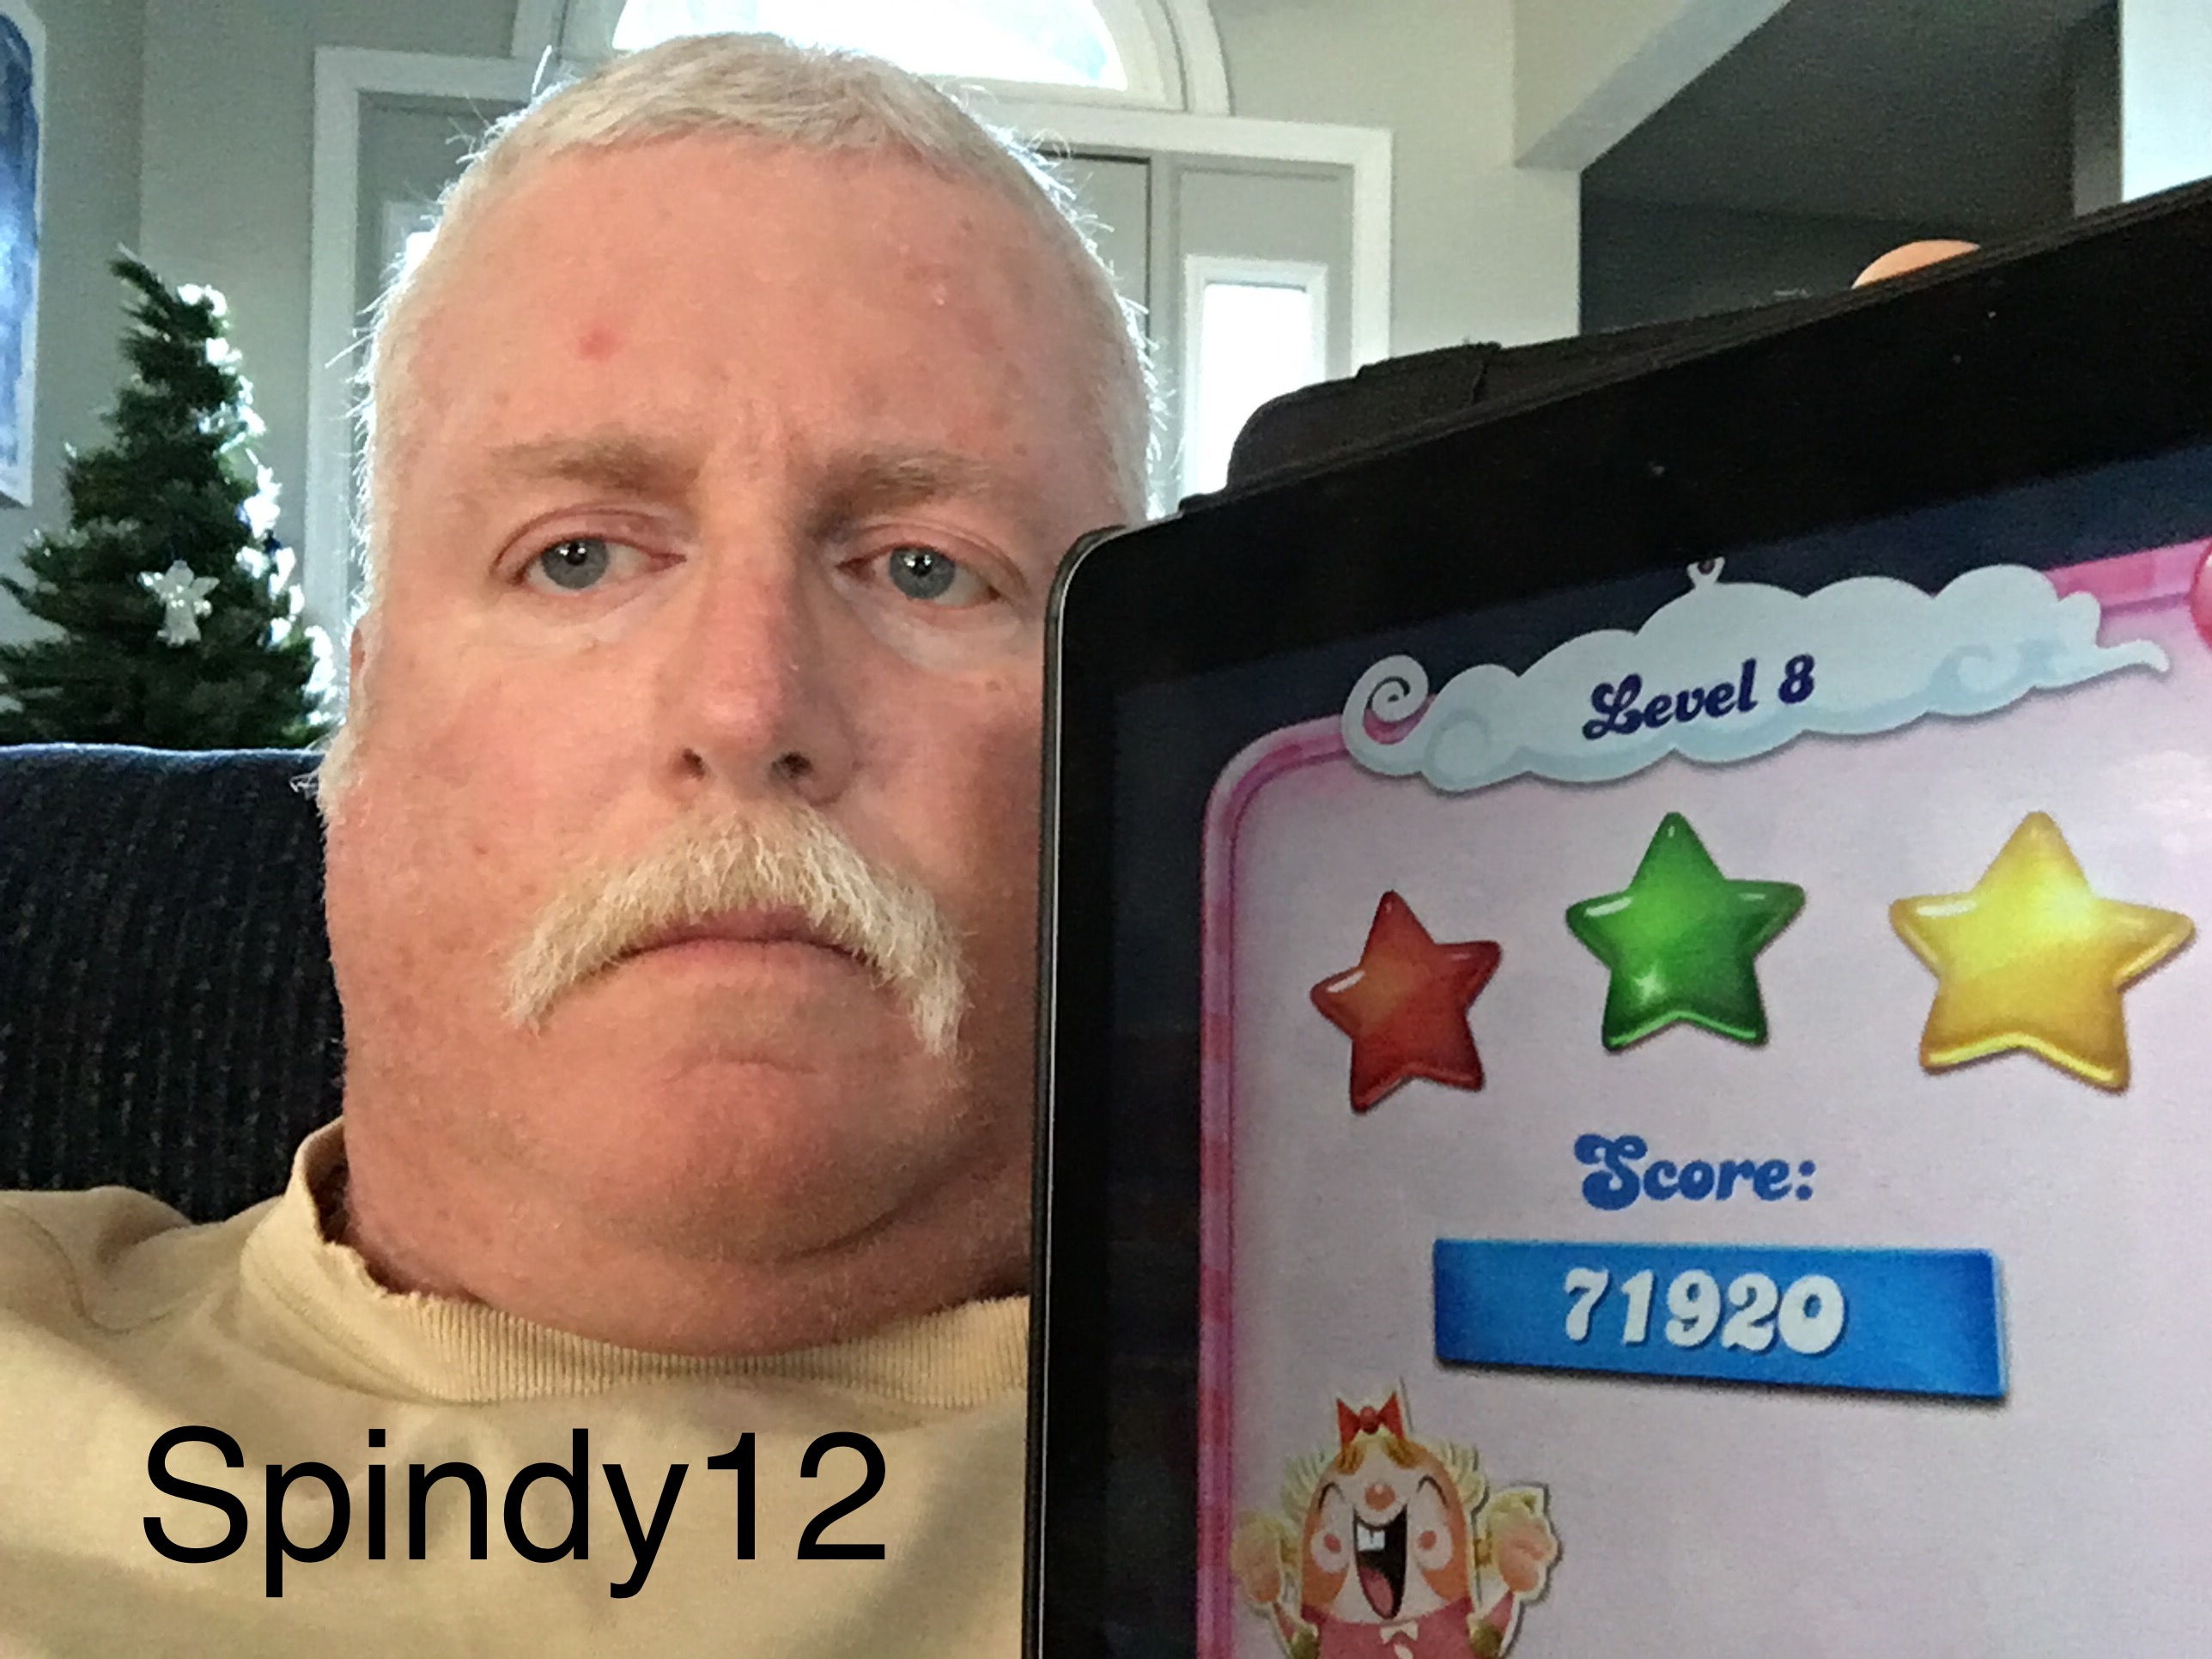 Spindy12: Candy Crush Saga: Level 008 (iOS) 71,920 points on 2016-12-20 15:39:32